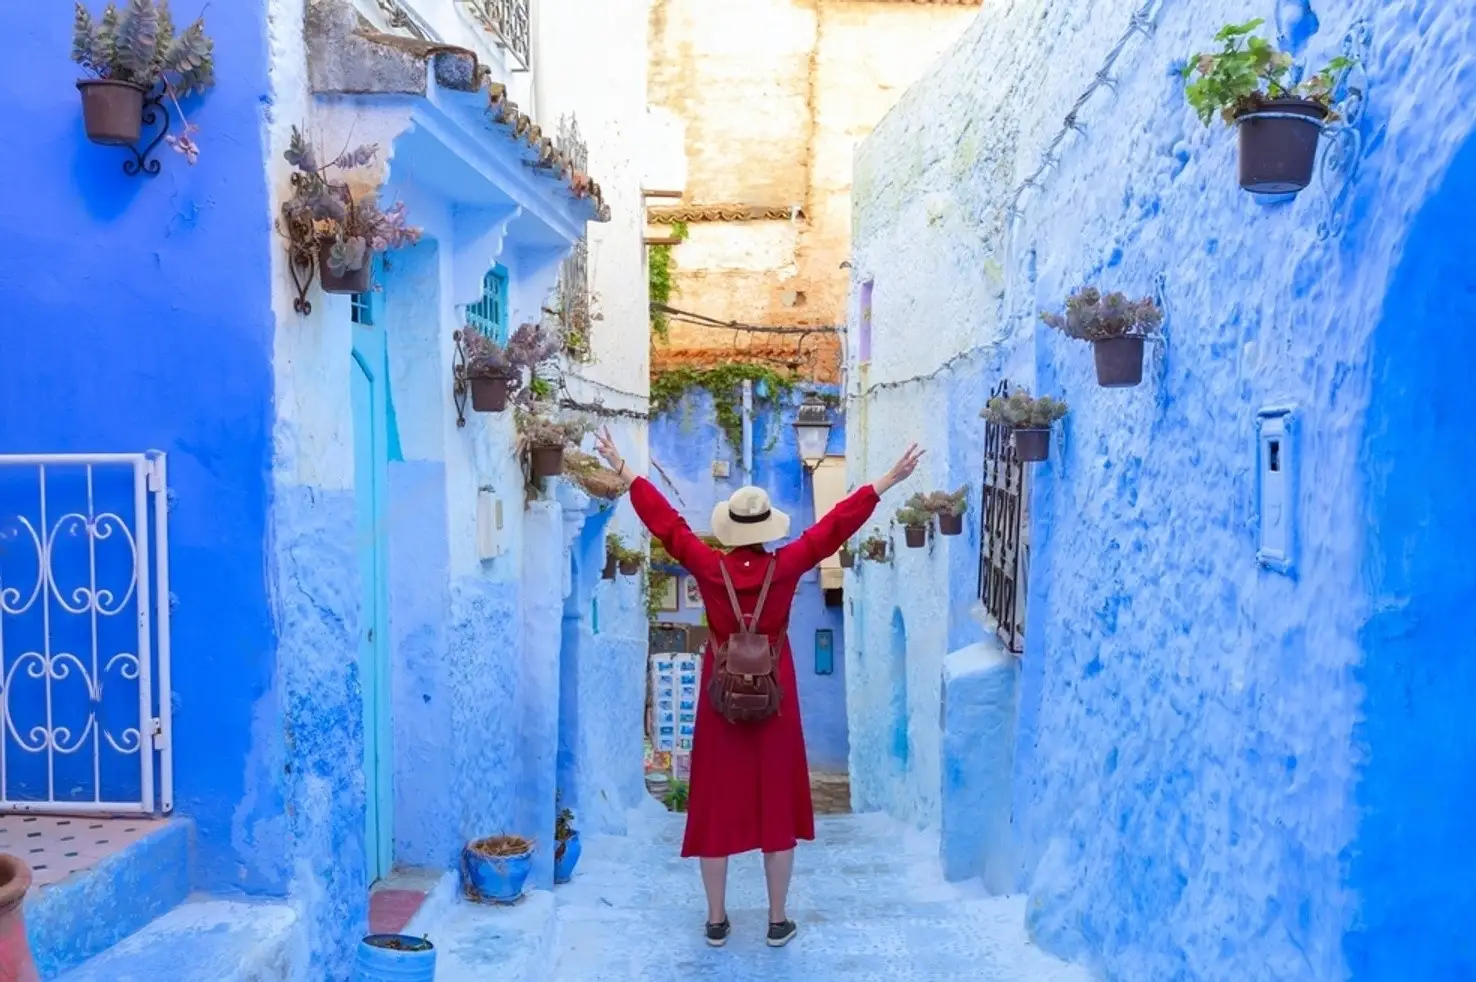 Day 9: Exploring Chefchaouen